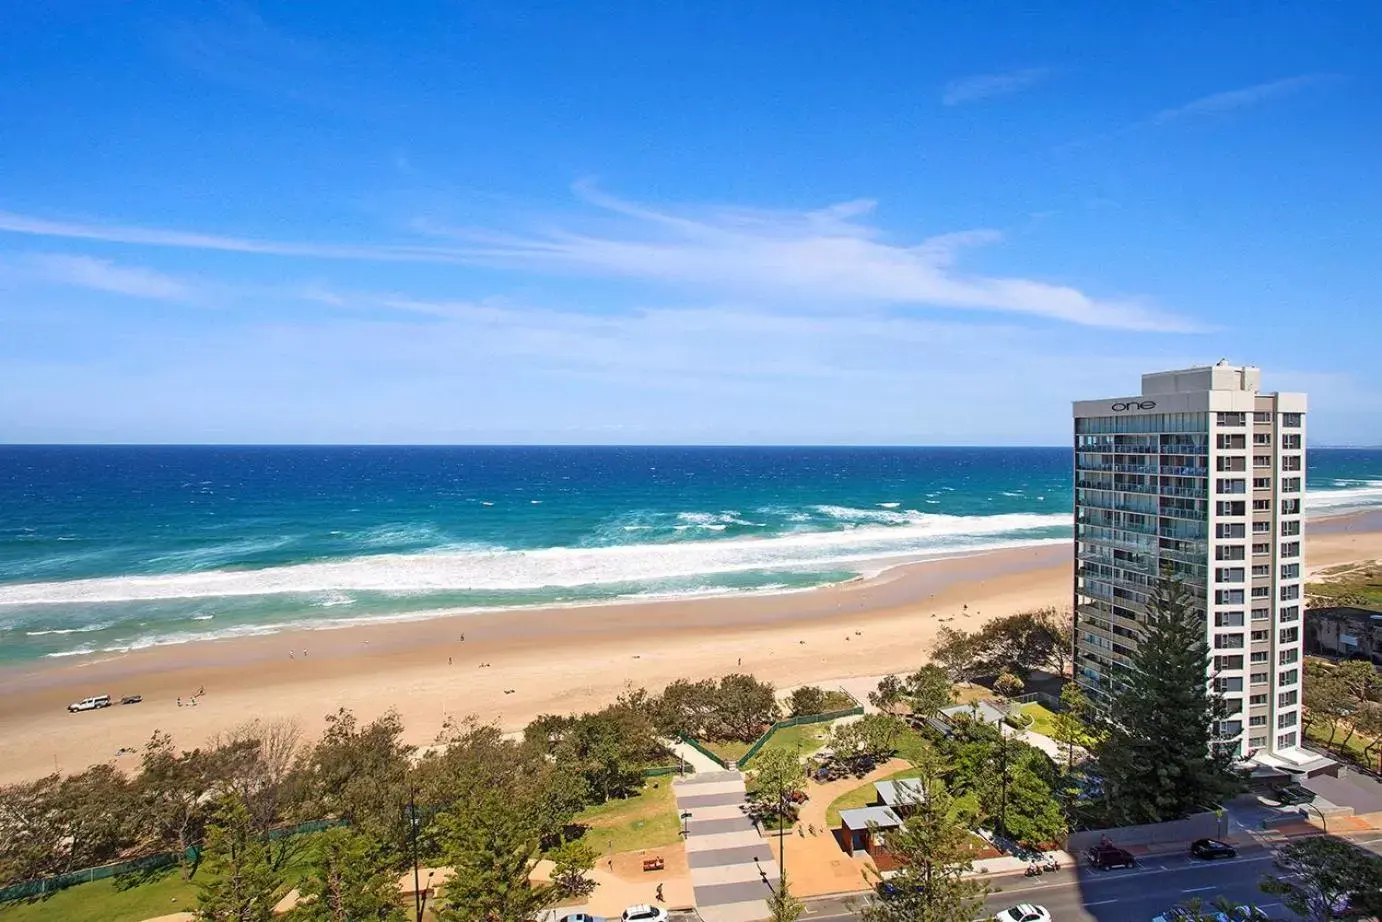 Property building in One The Esplanade Apartments on Surfers Paradise